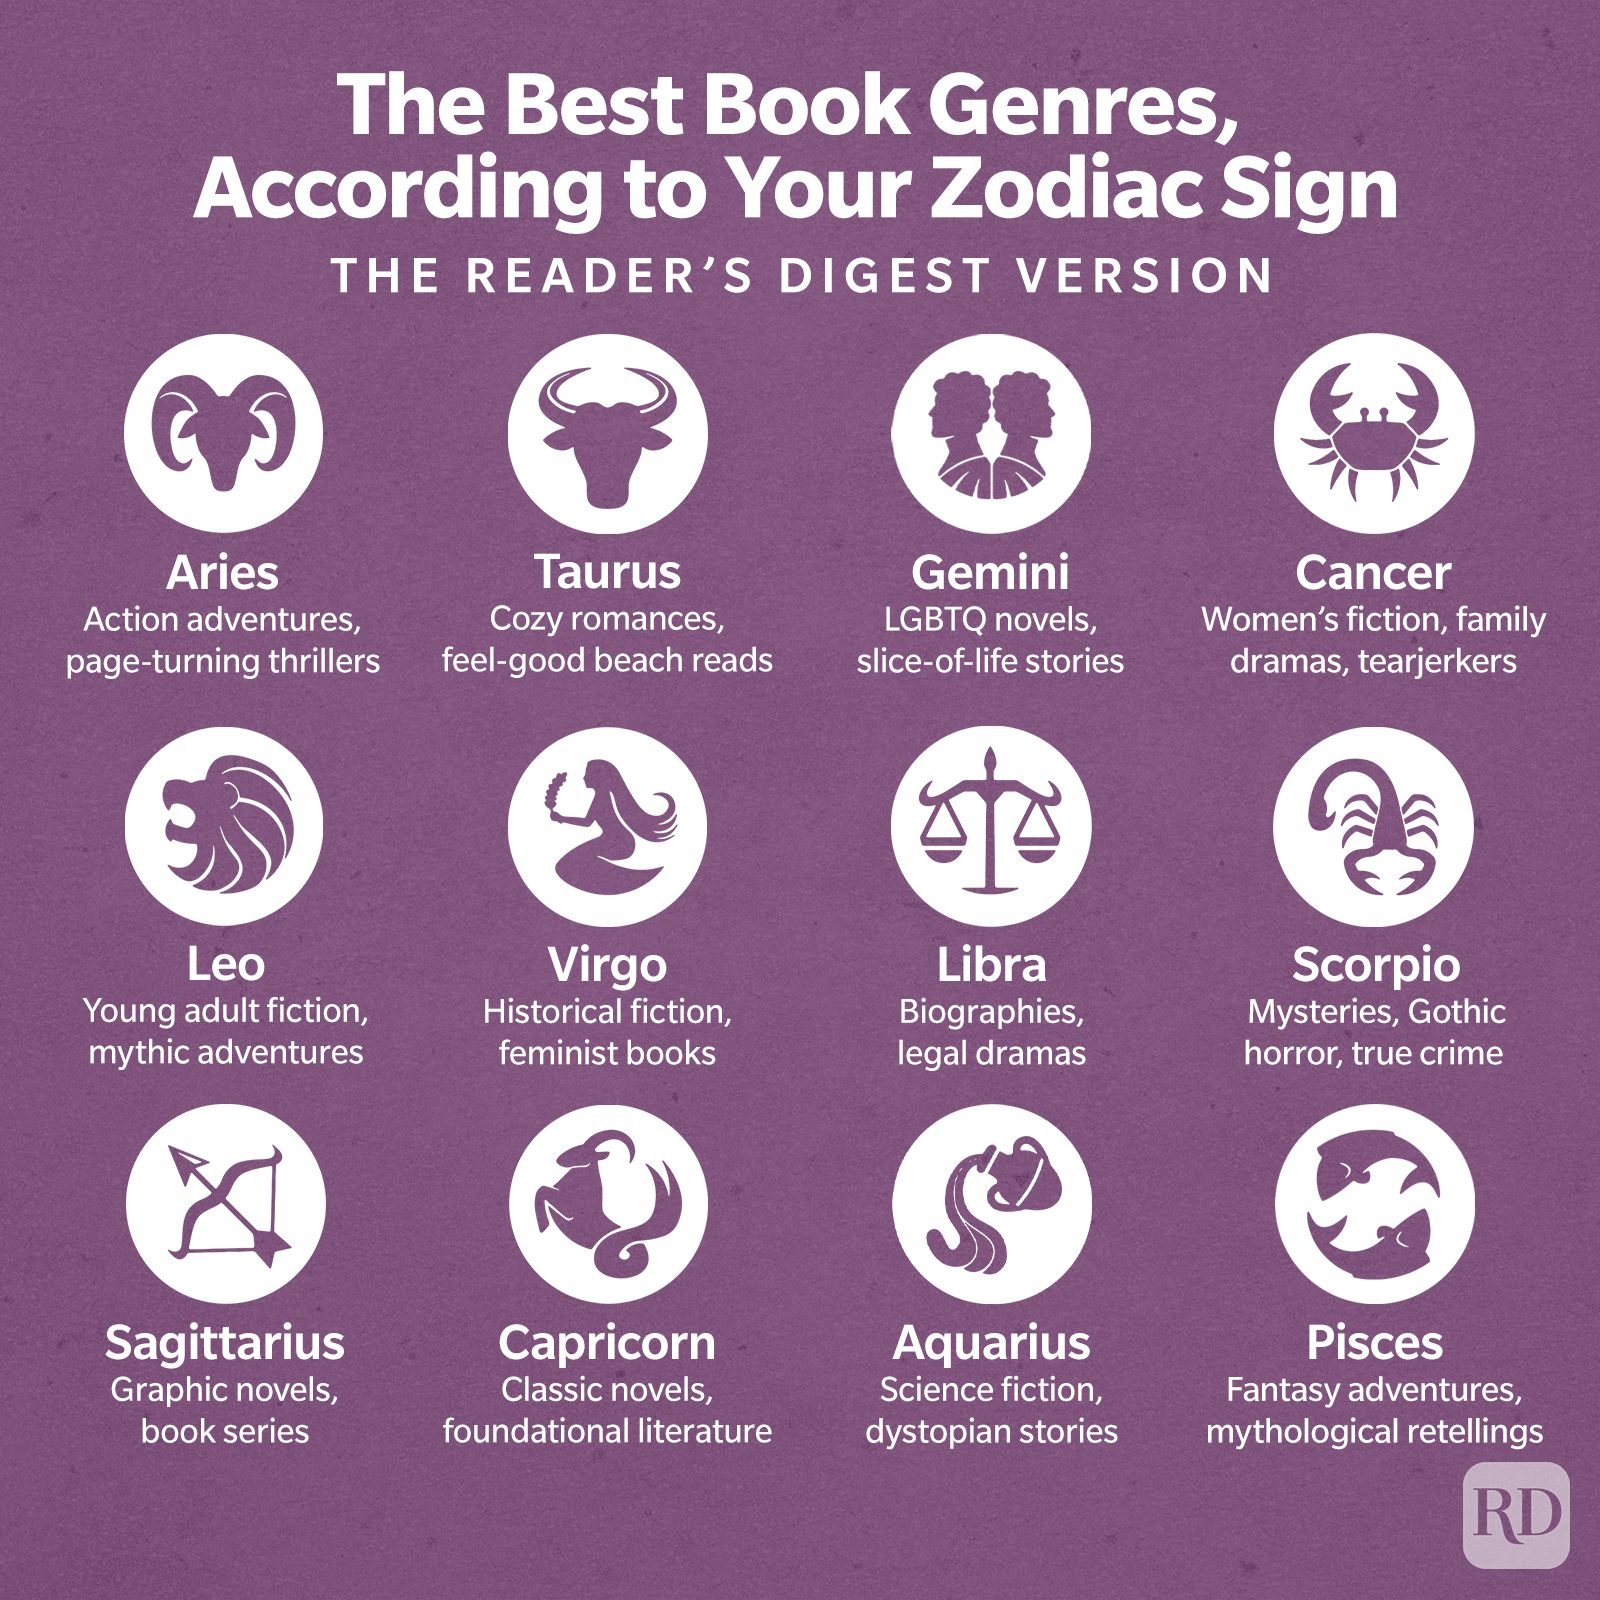 The Best Genre and Books, Based on Zodiac Signs